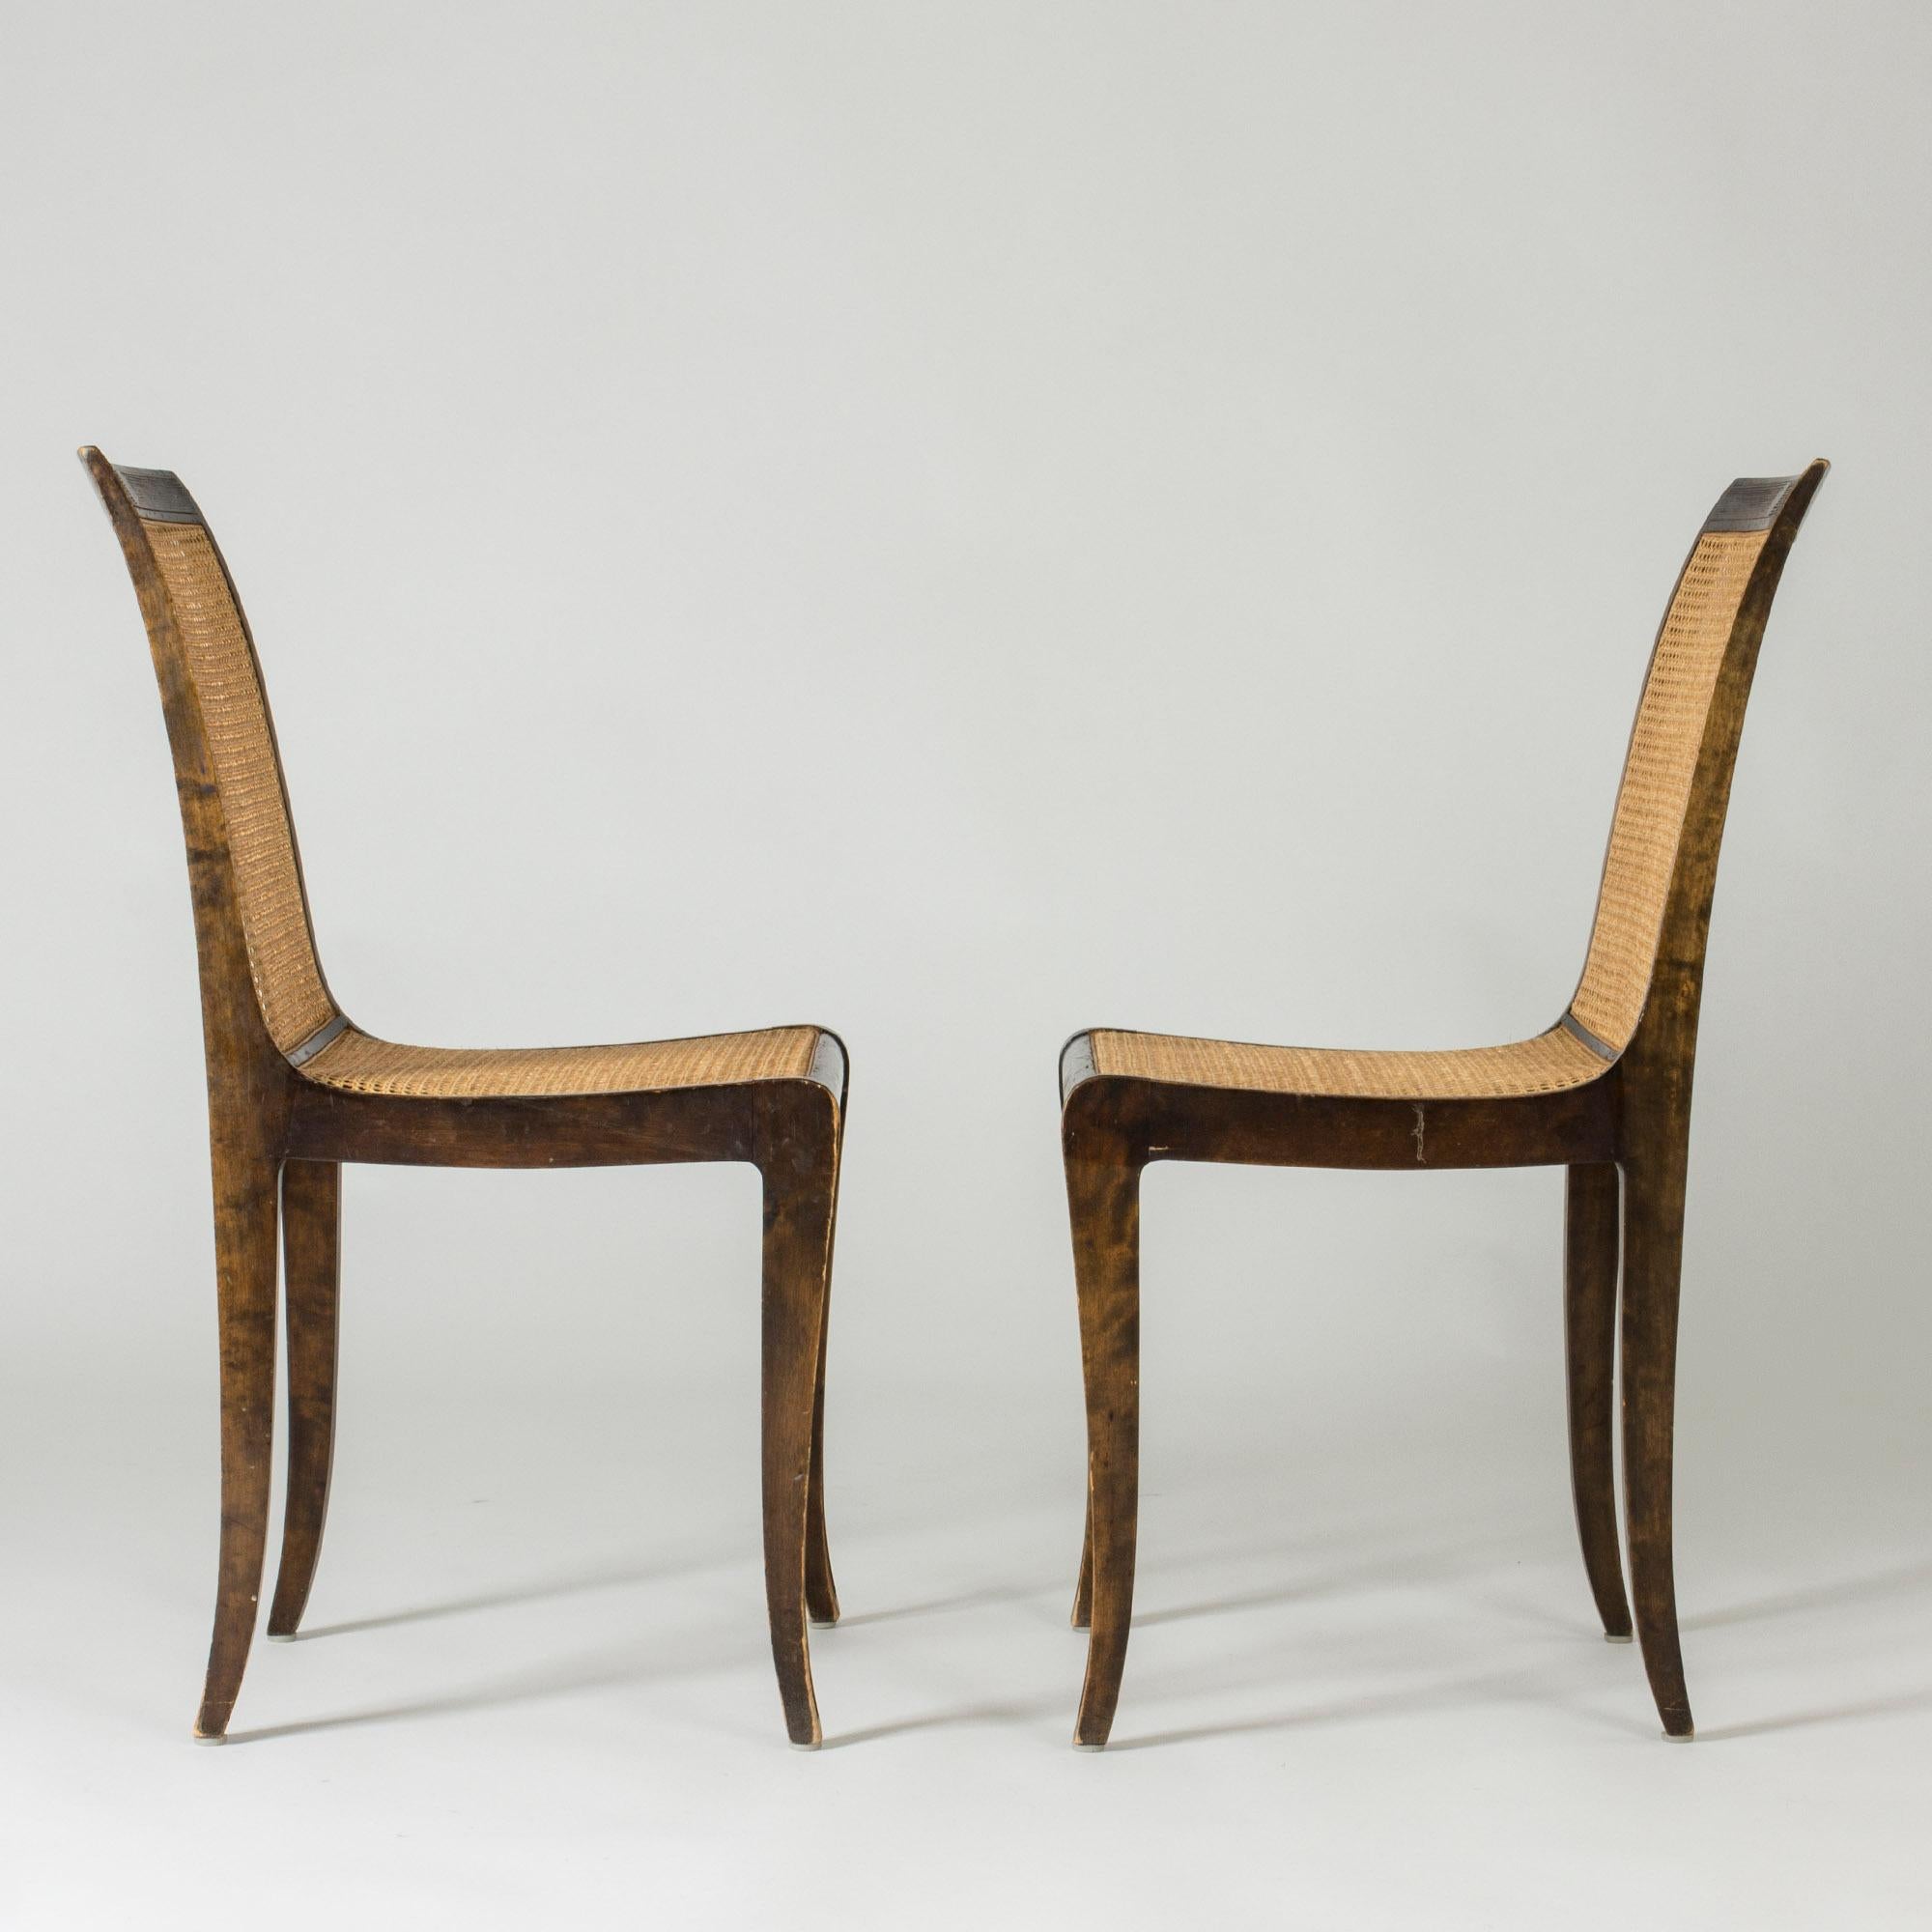 Pair of beautiful side chairs by Carl Malmsten. Made from stained wood with rattan backs, contrasting elegantly in color. Lovely, flowing lines, light expression.